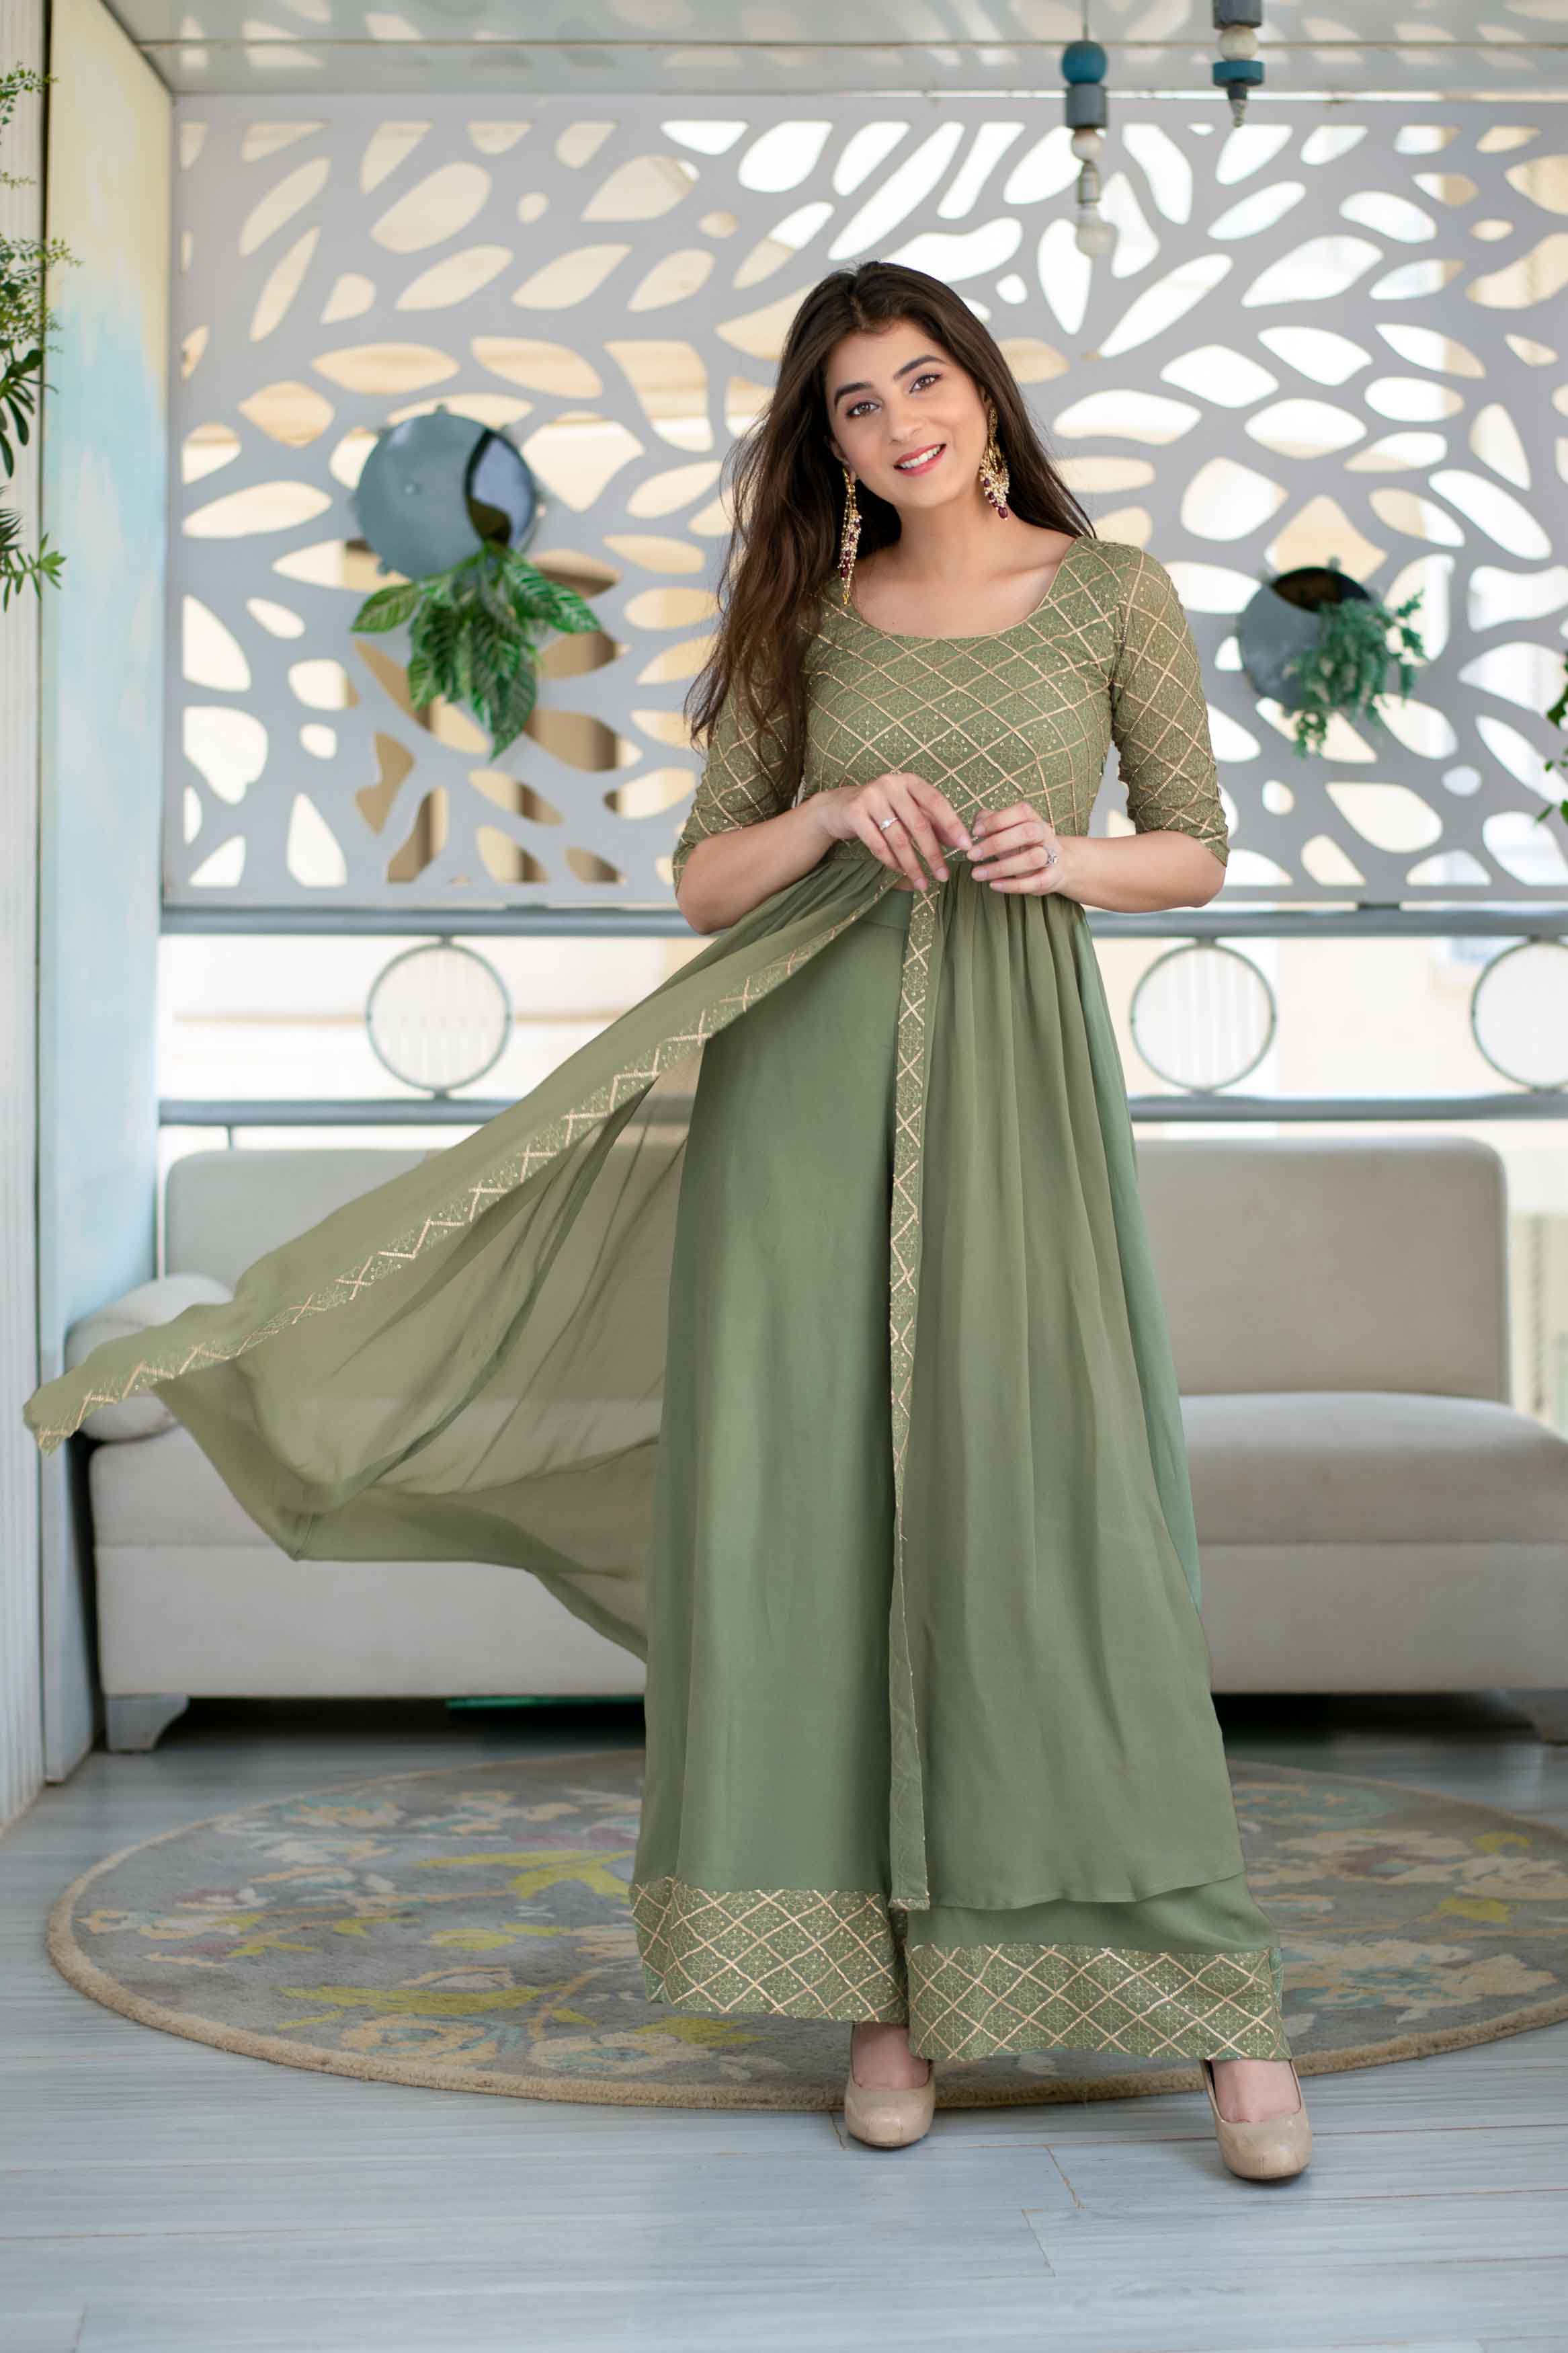 Buy Olive Criss- Cross Indo Western Dress online in India | label ...